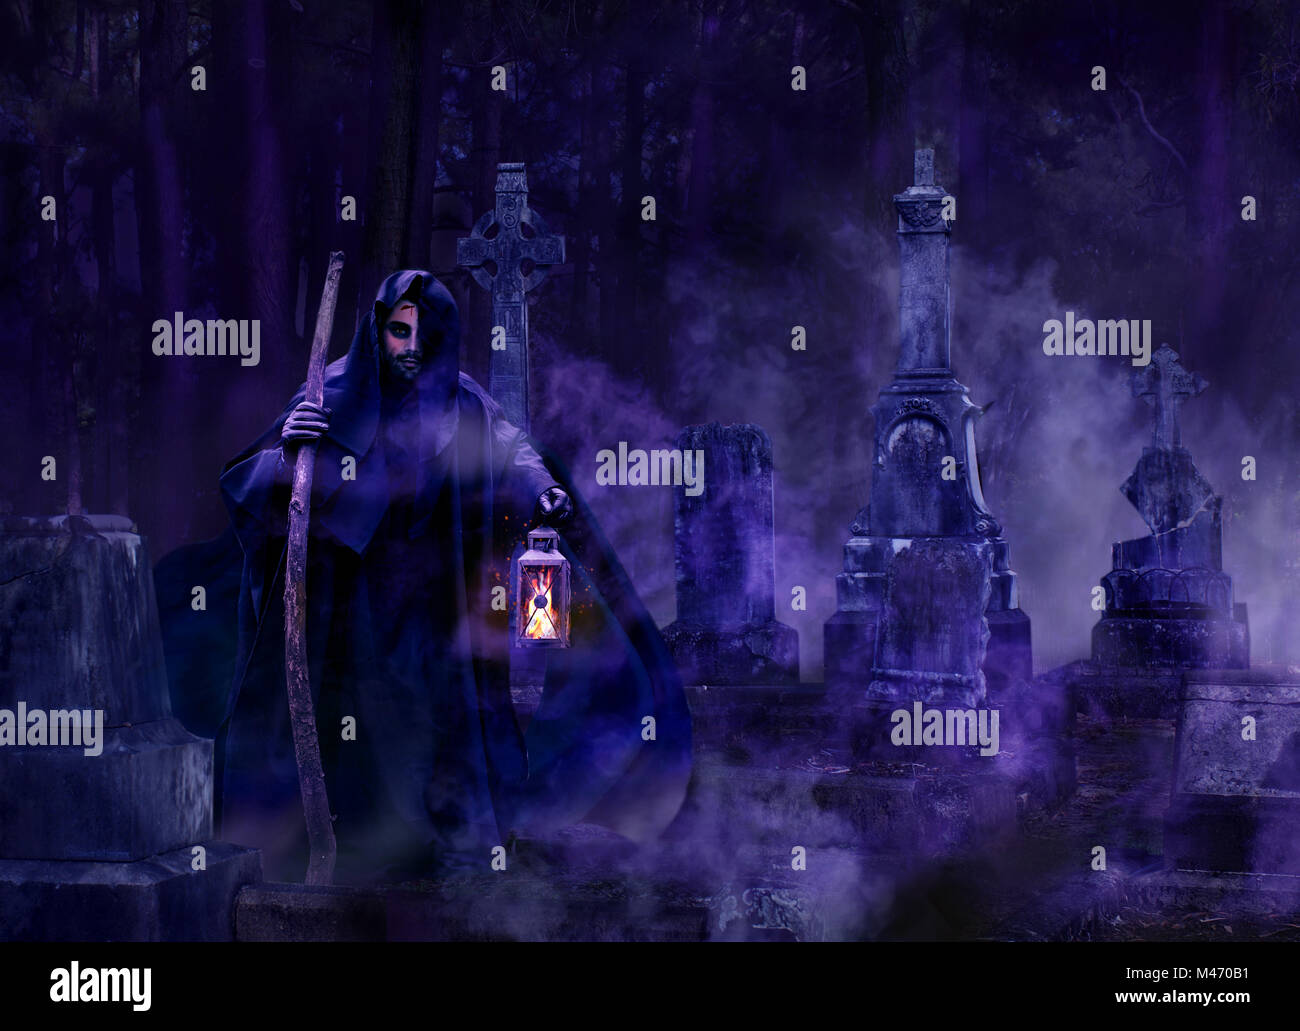 Wicked gothic man in a hooded balk robe holding a lantern walking through a foggy graveyard at night Stock Photo